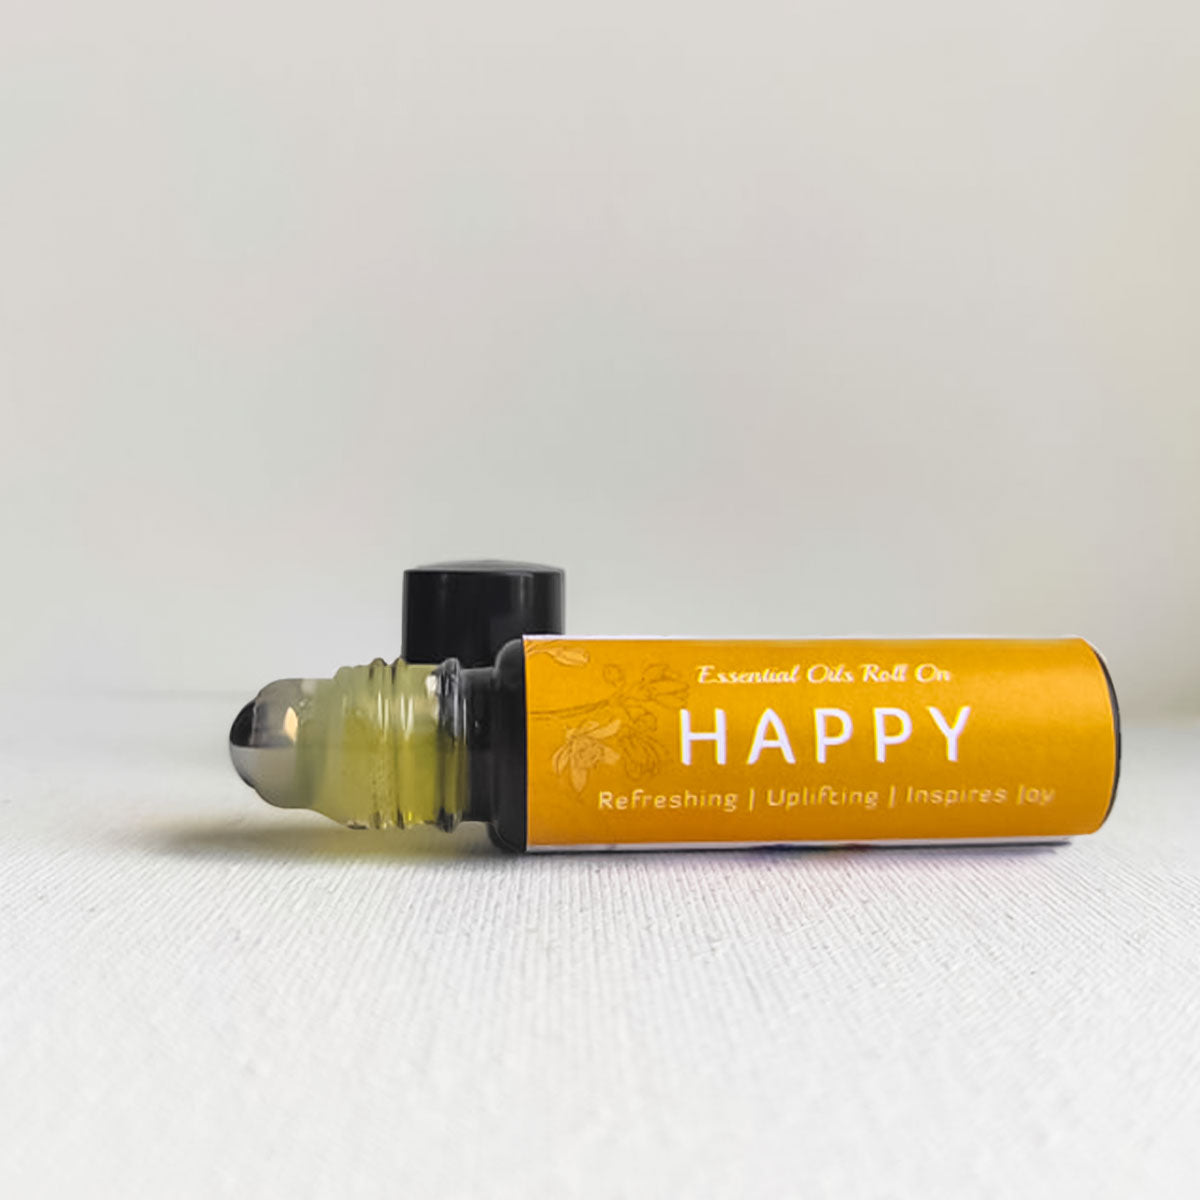 Uplifting, refreshing essential oil roll on happy